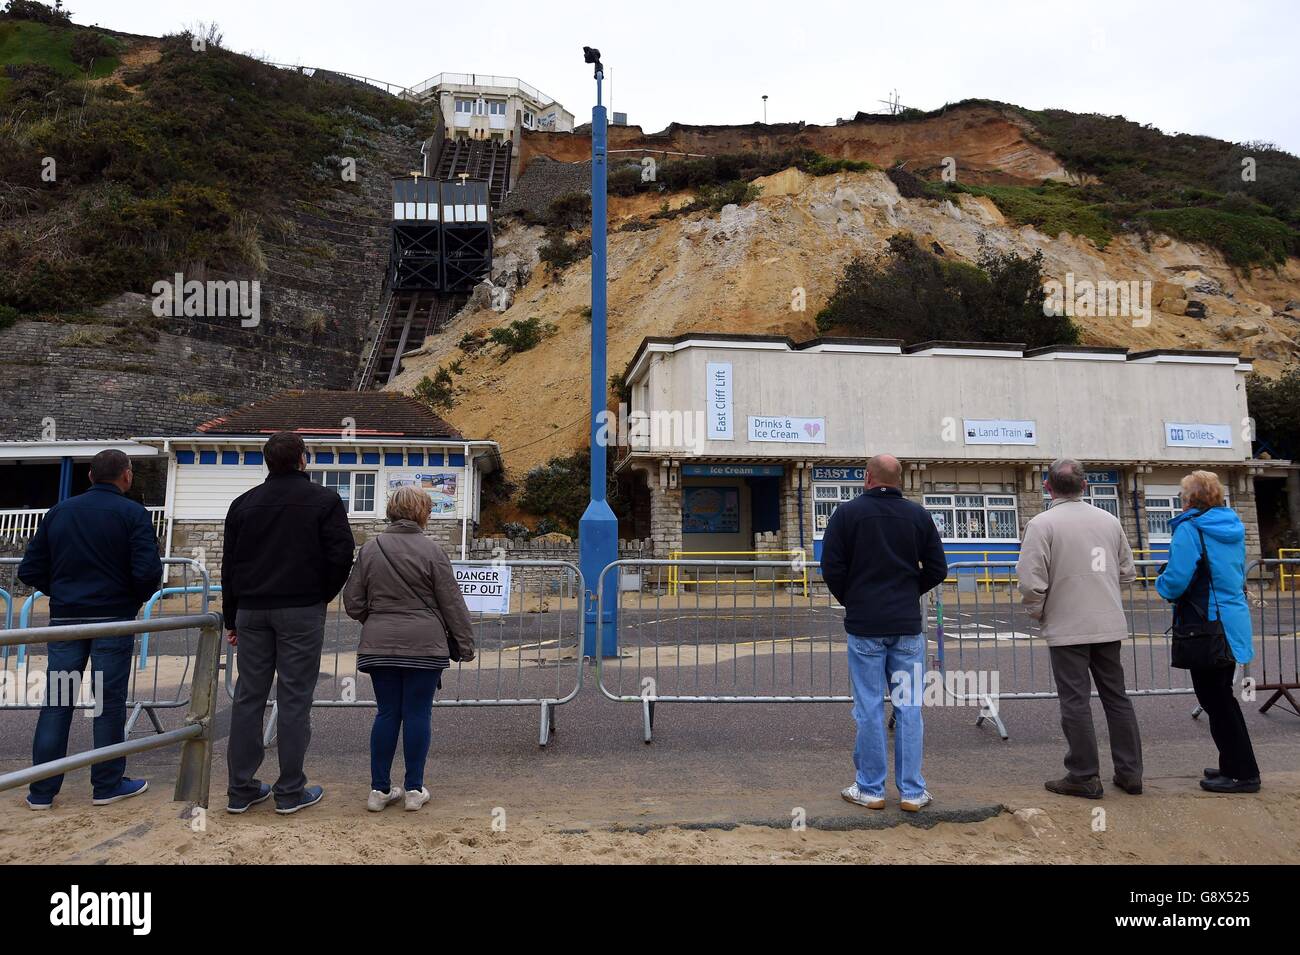 Members of the public look up at the collapsed cliff next to the East Cliff funicular railway on Bournemouth Beach, which has been damaged after a huge landslide saw tonnes of debris crash down on a coastal resort. Stock Photo